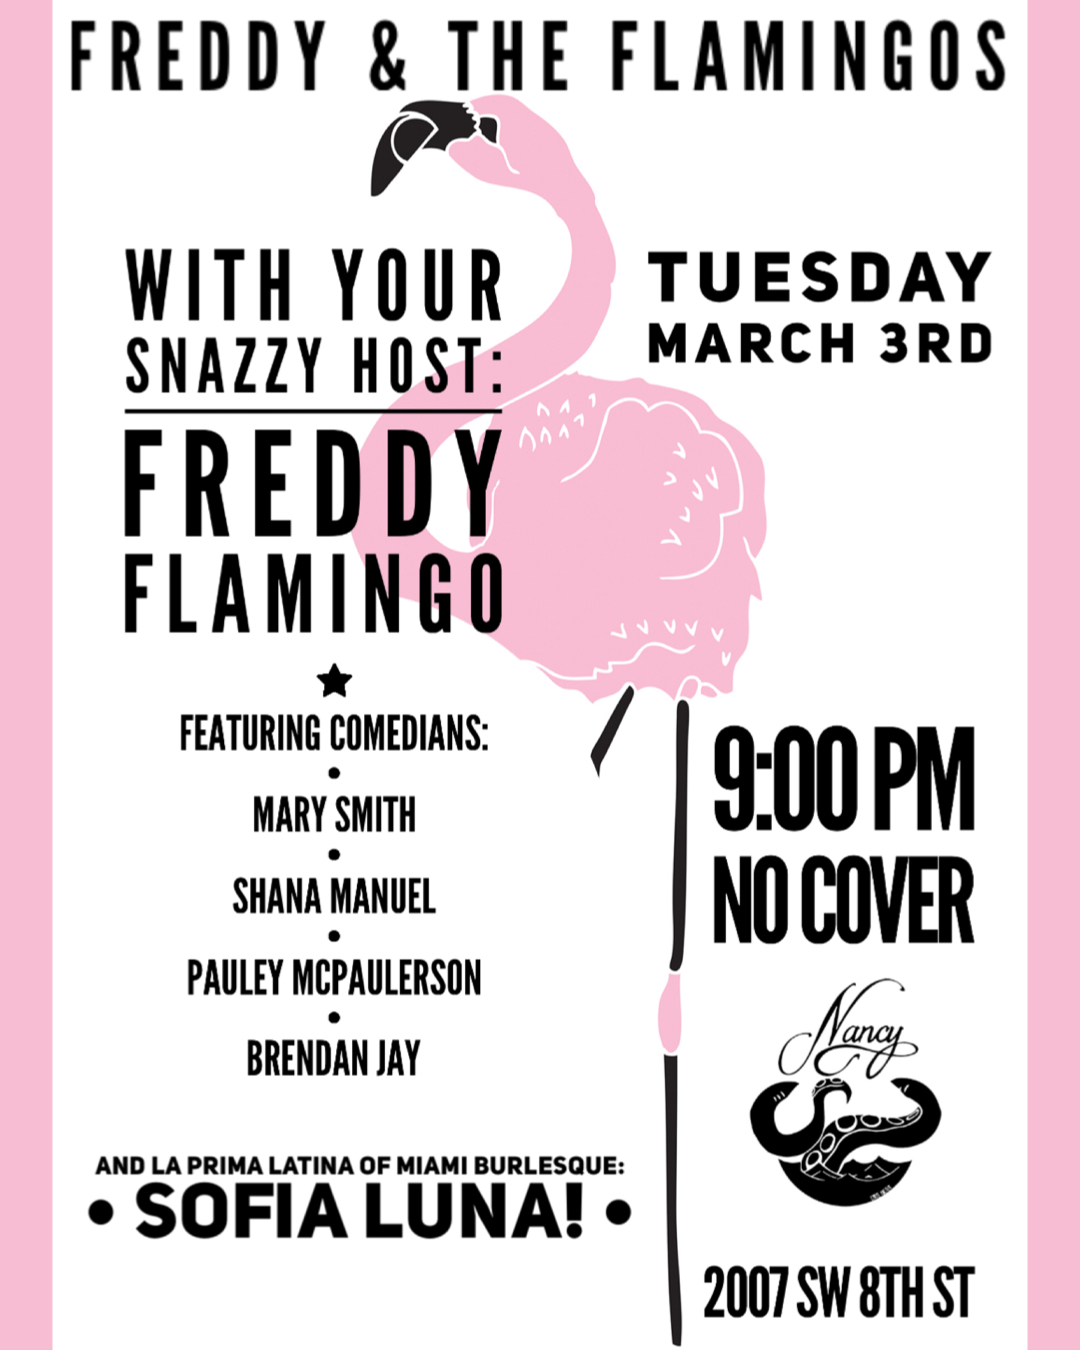 Freddy & The Flamingos! Comedy! Live Music! Variety Show!